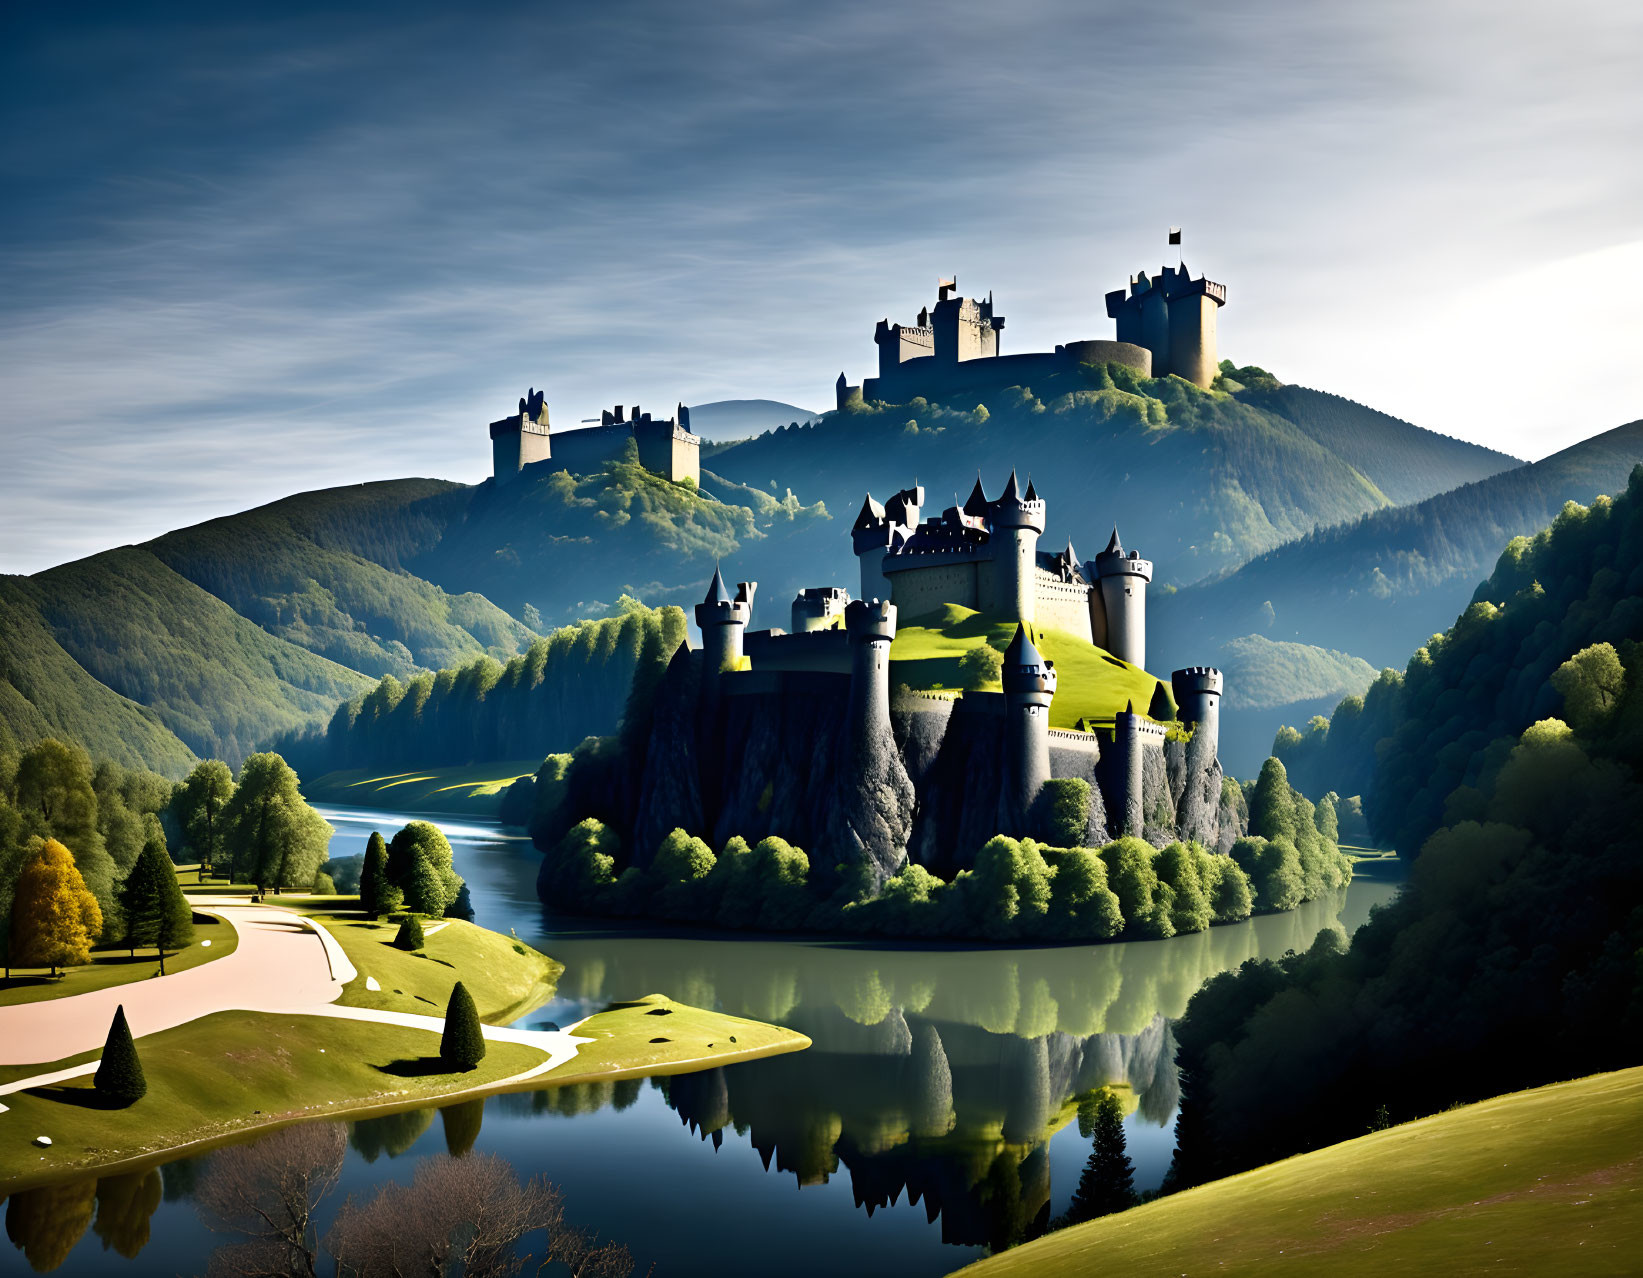 Castle on Hill Overlooking Serene Lake and Lush Landscape